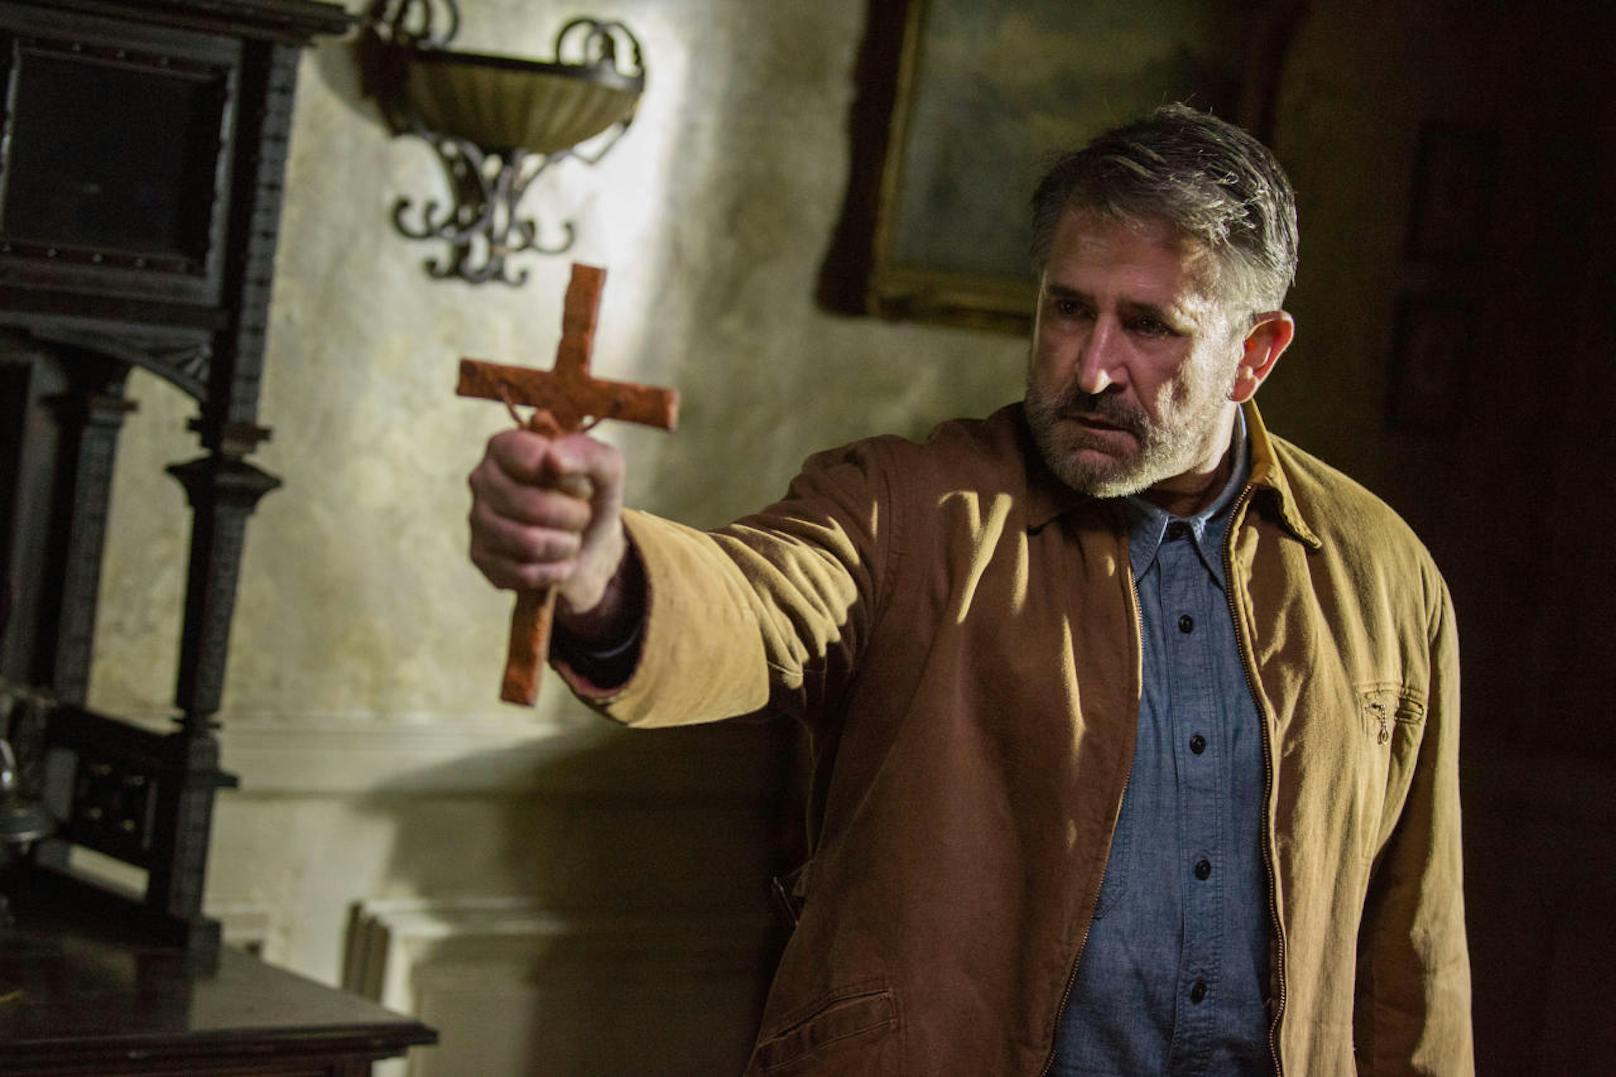 Anthony LaPaglia in "Annabelle 2"